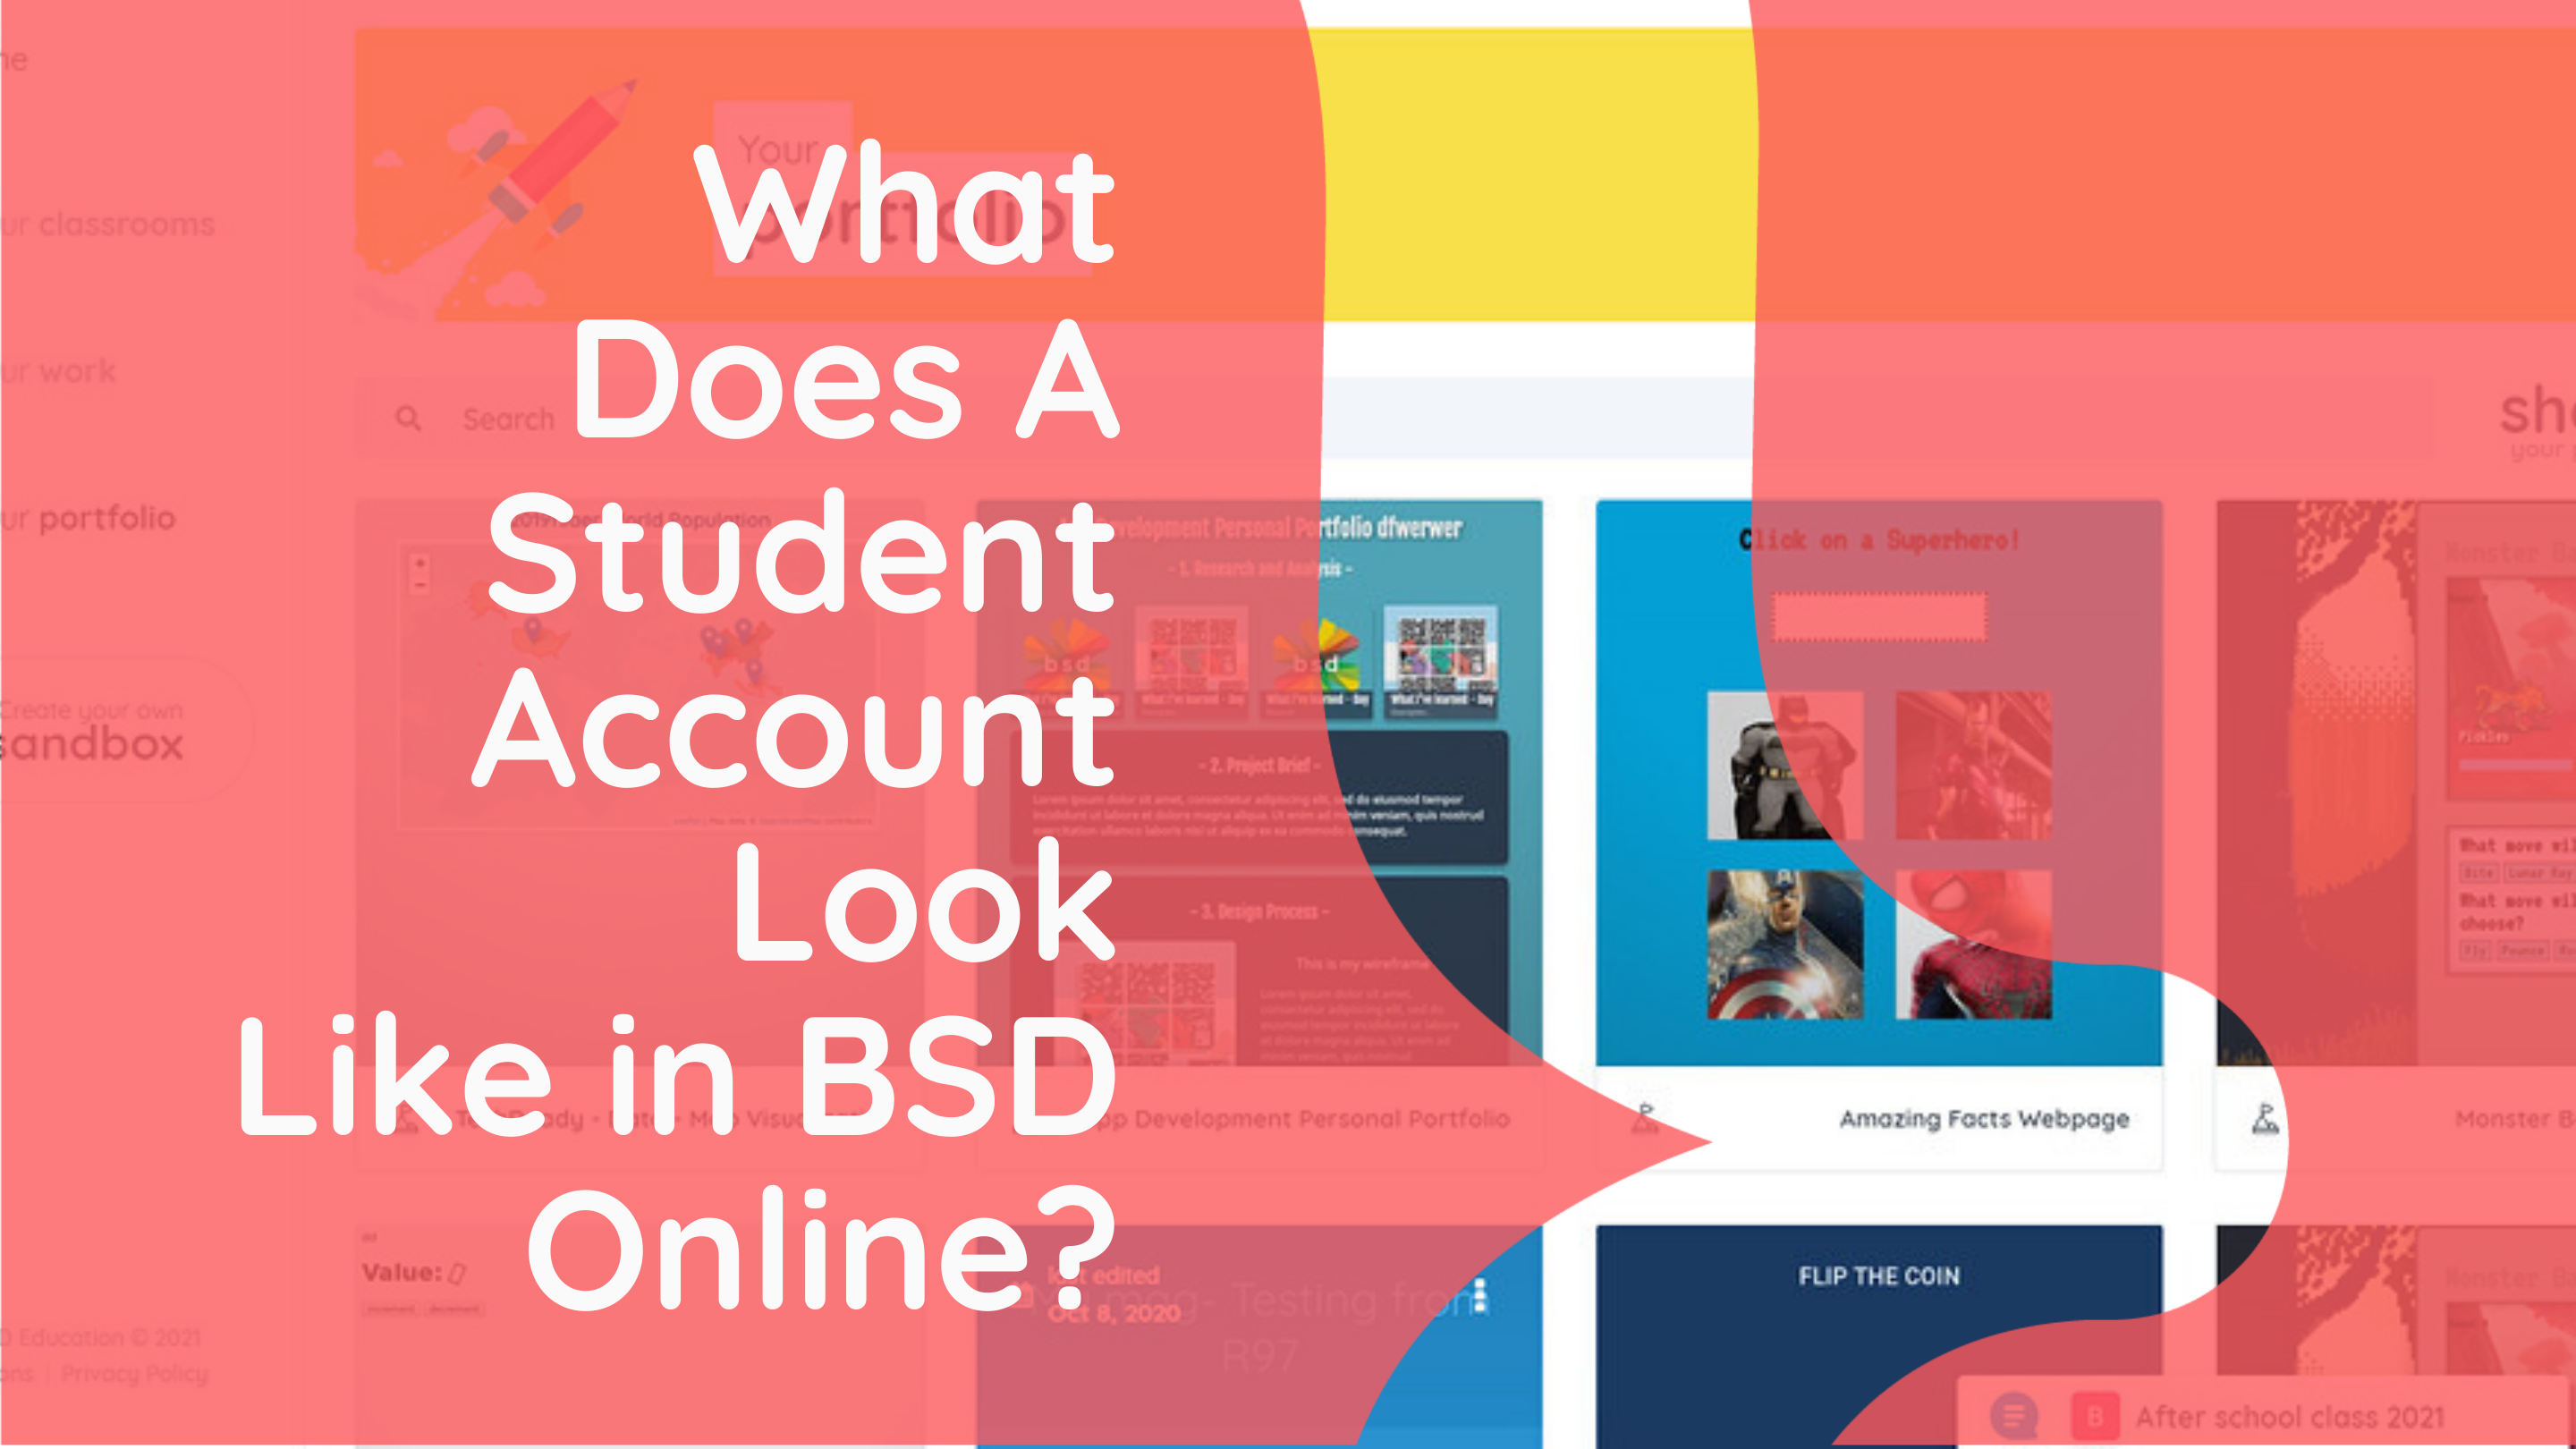 What Does A Student Account Look Like?